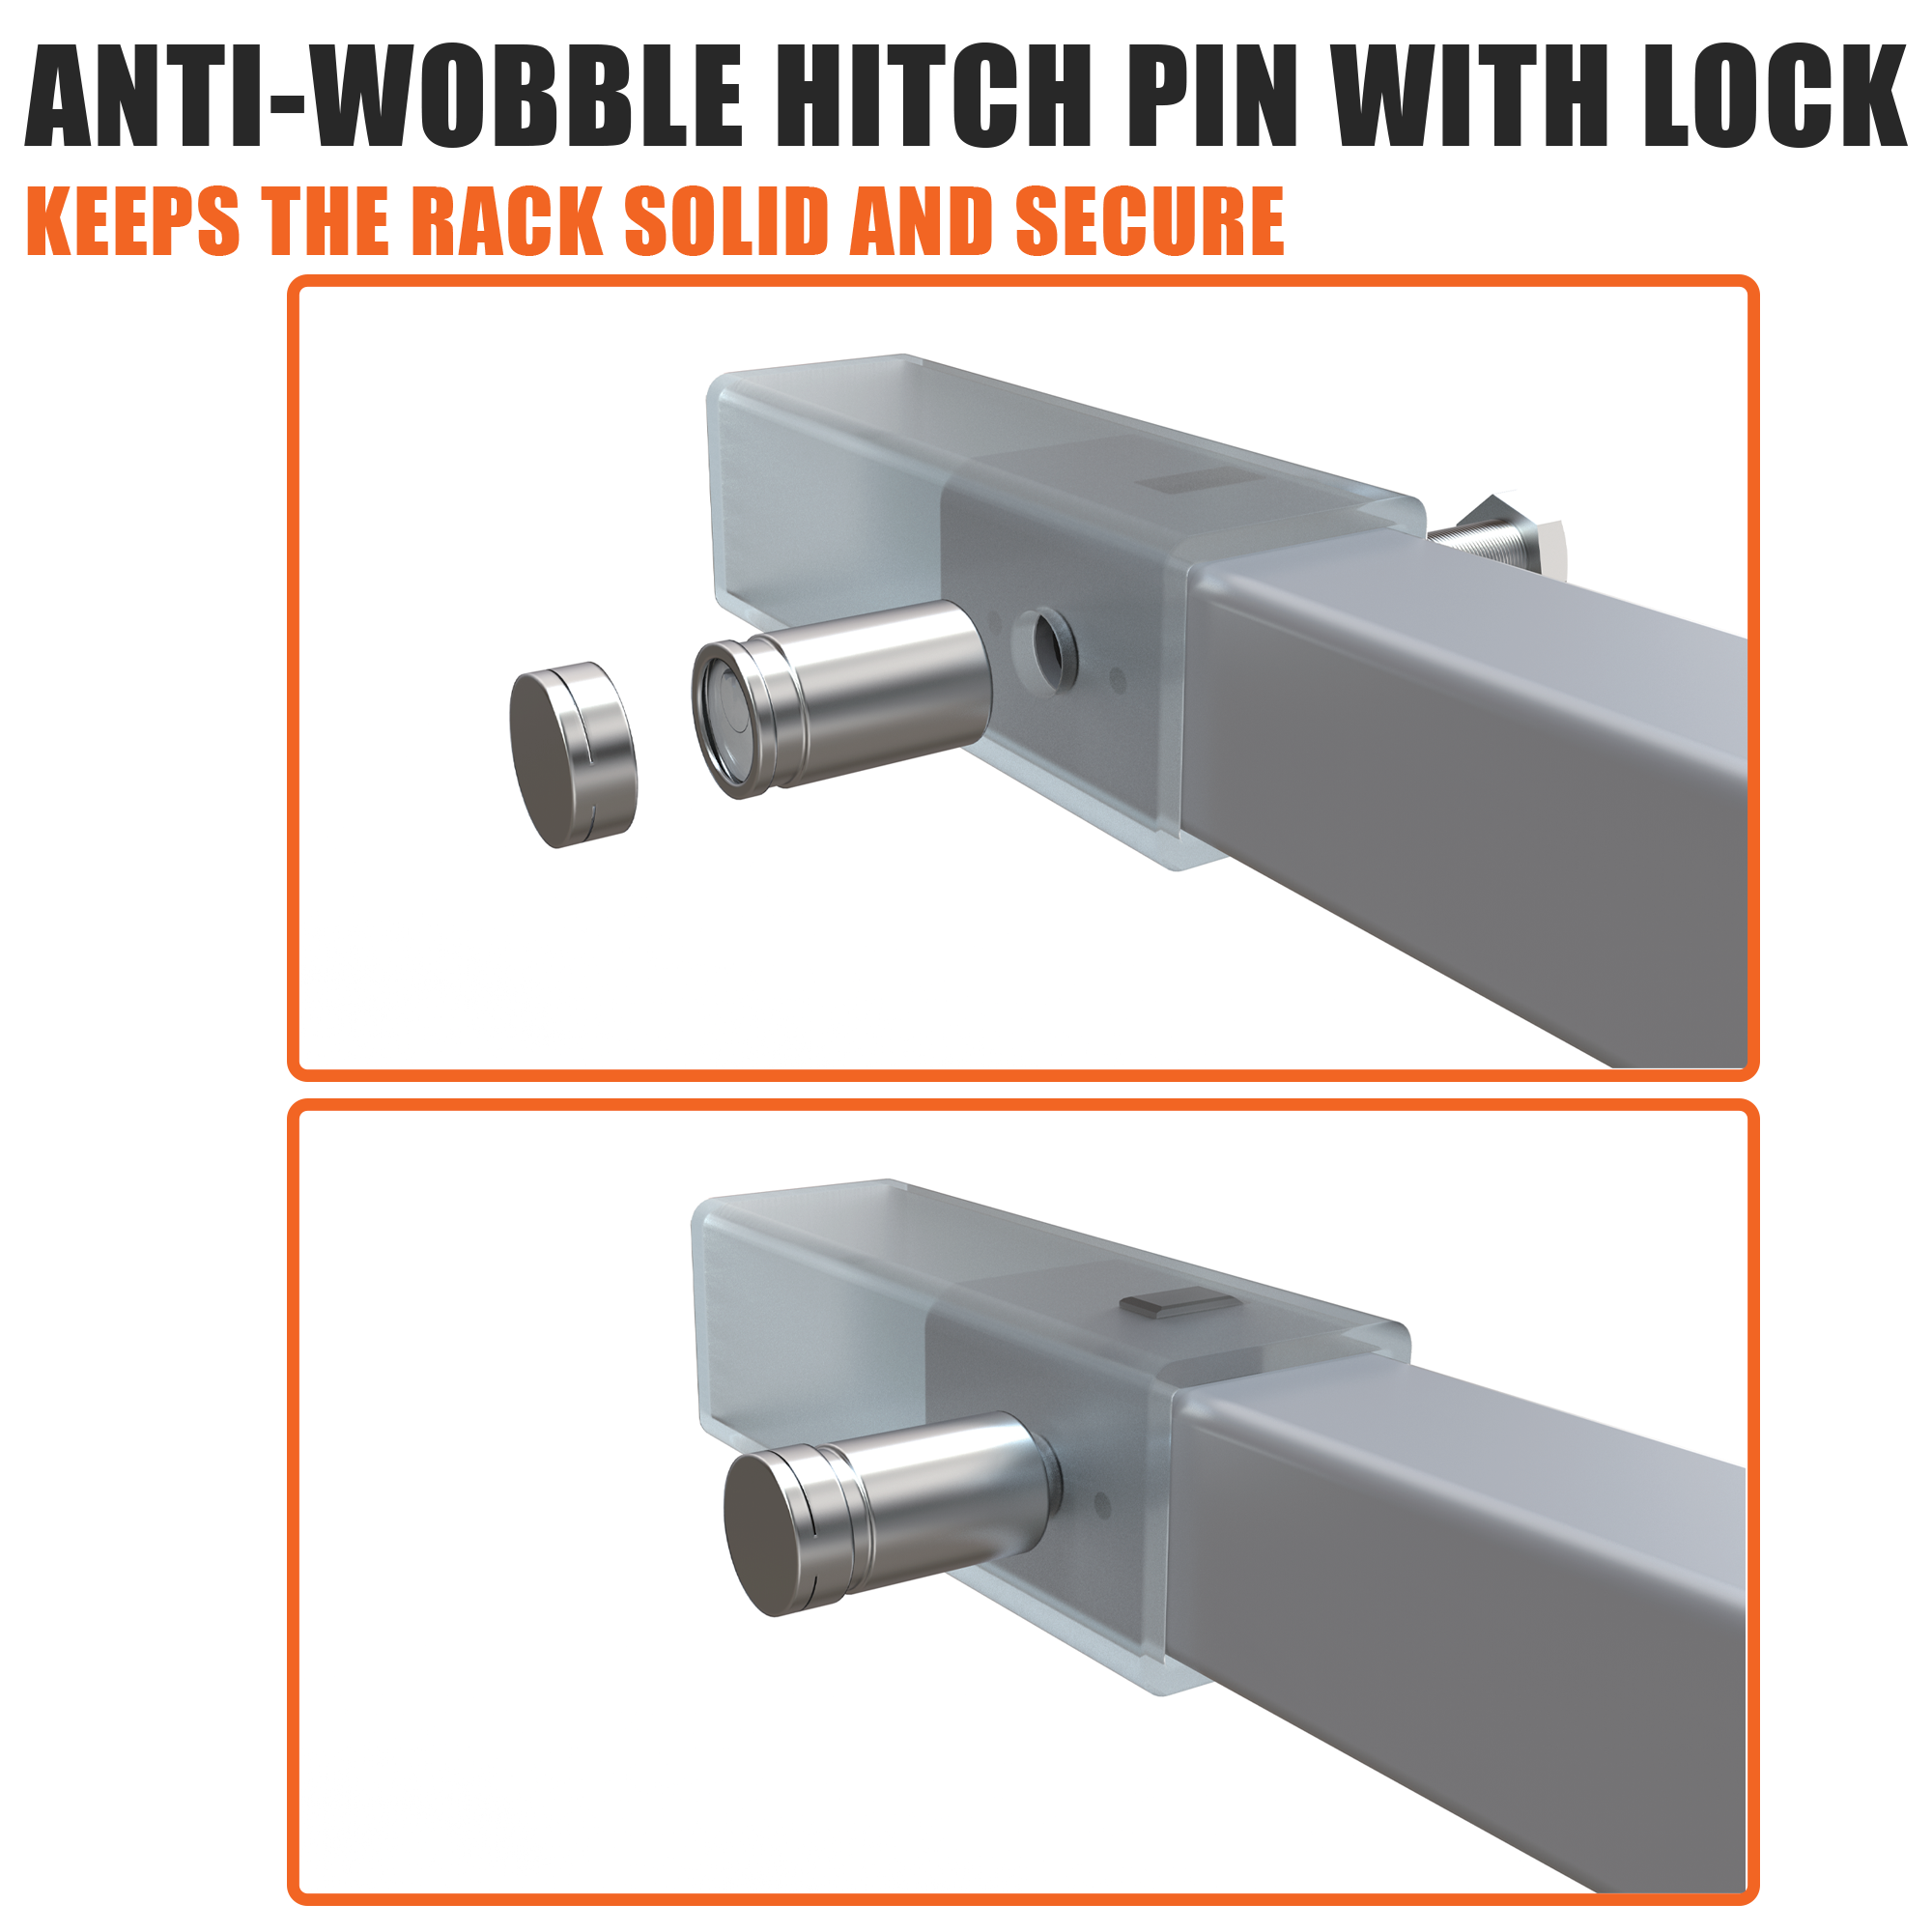 Anti-Wobble Hitch Pin with Lock Featured